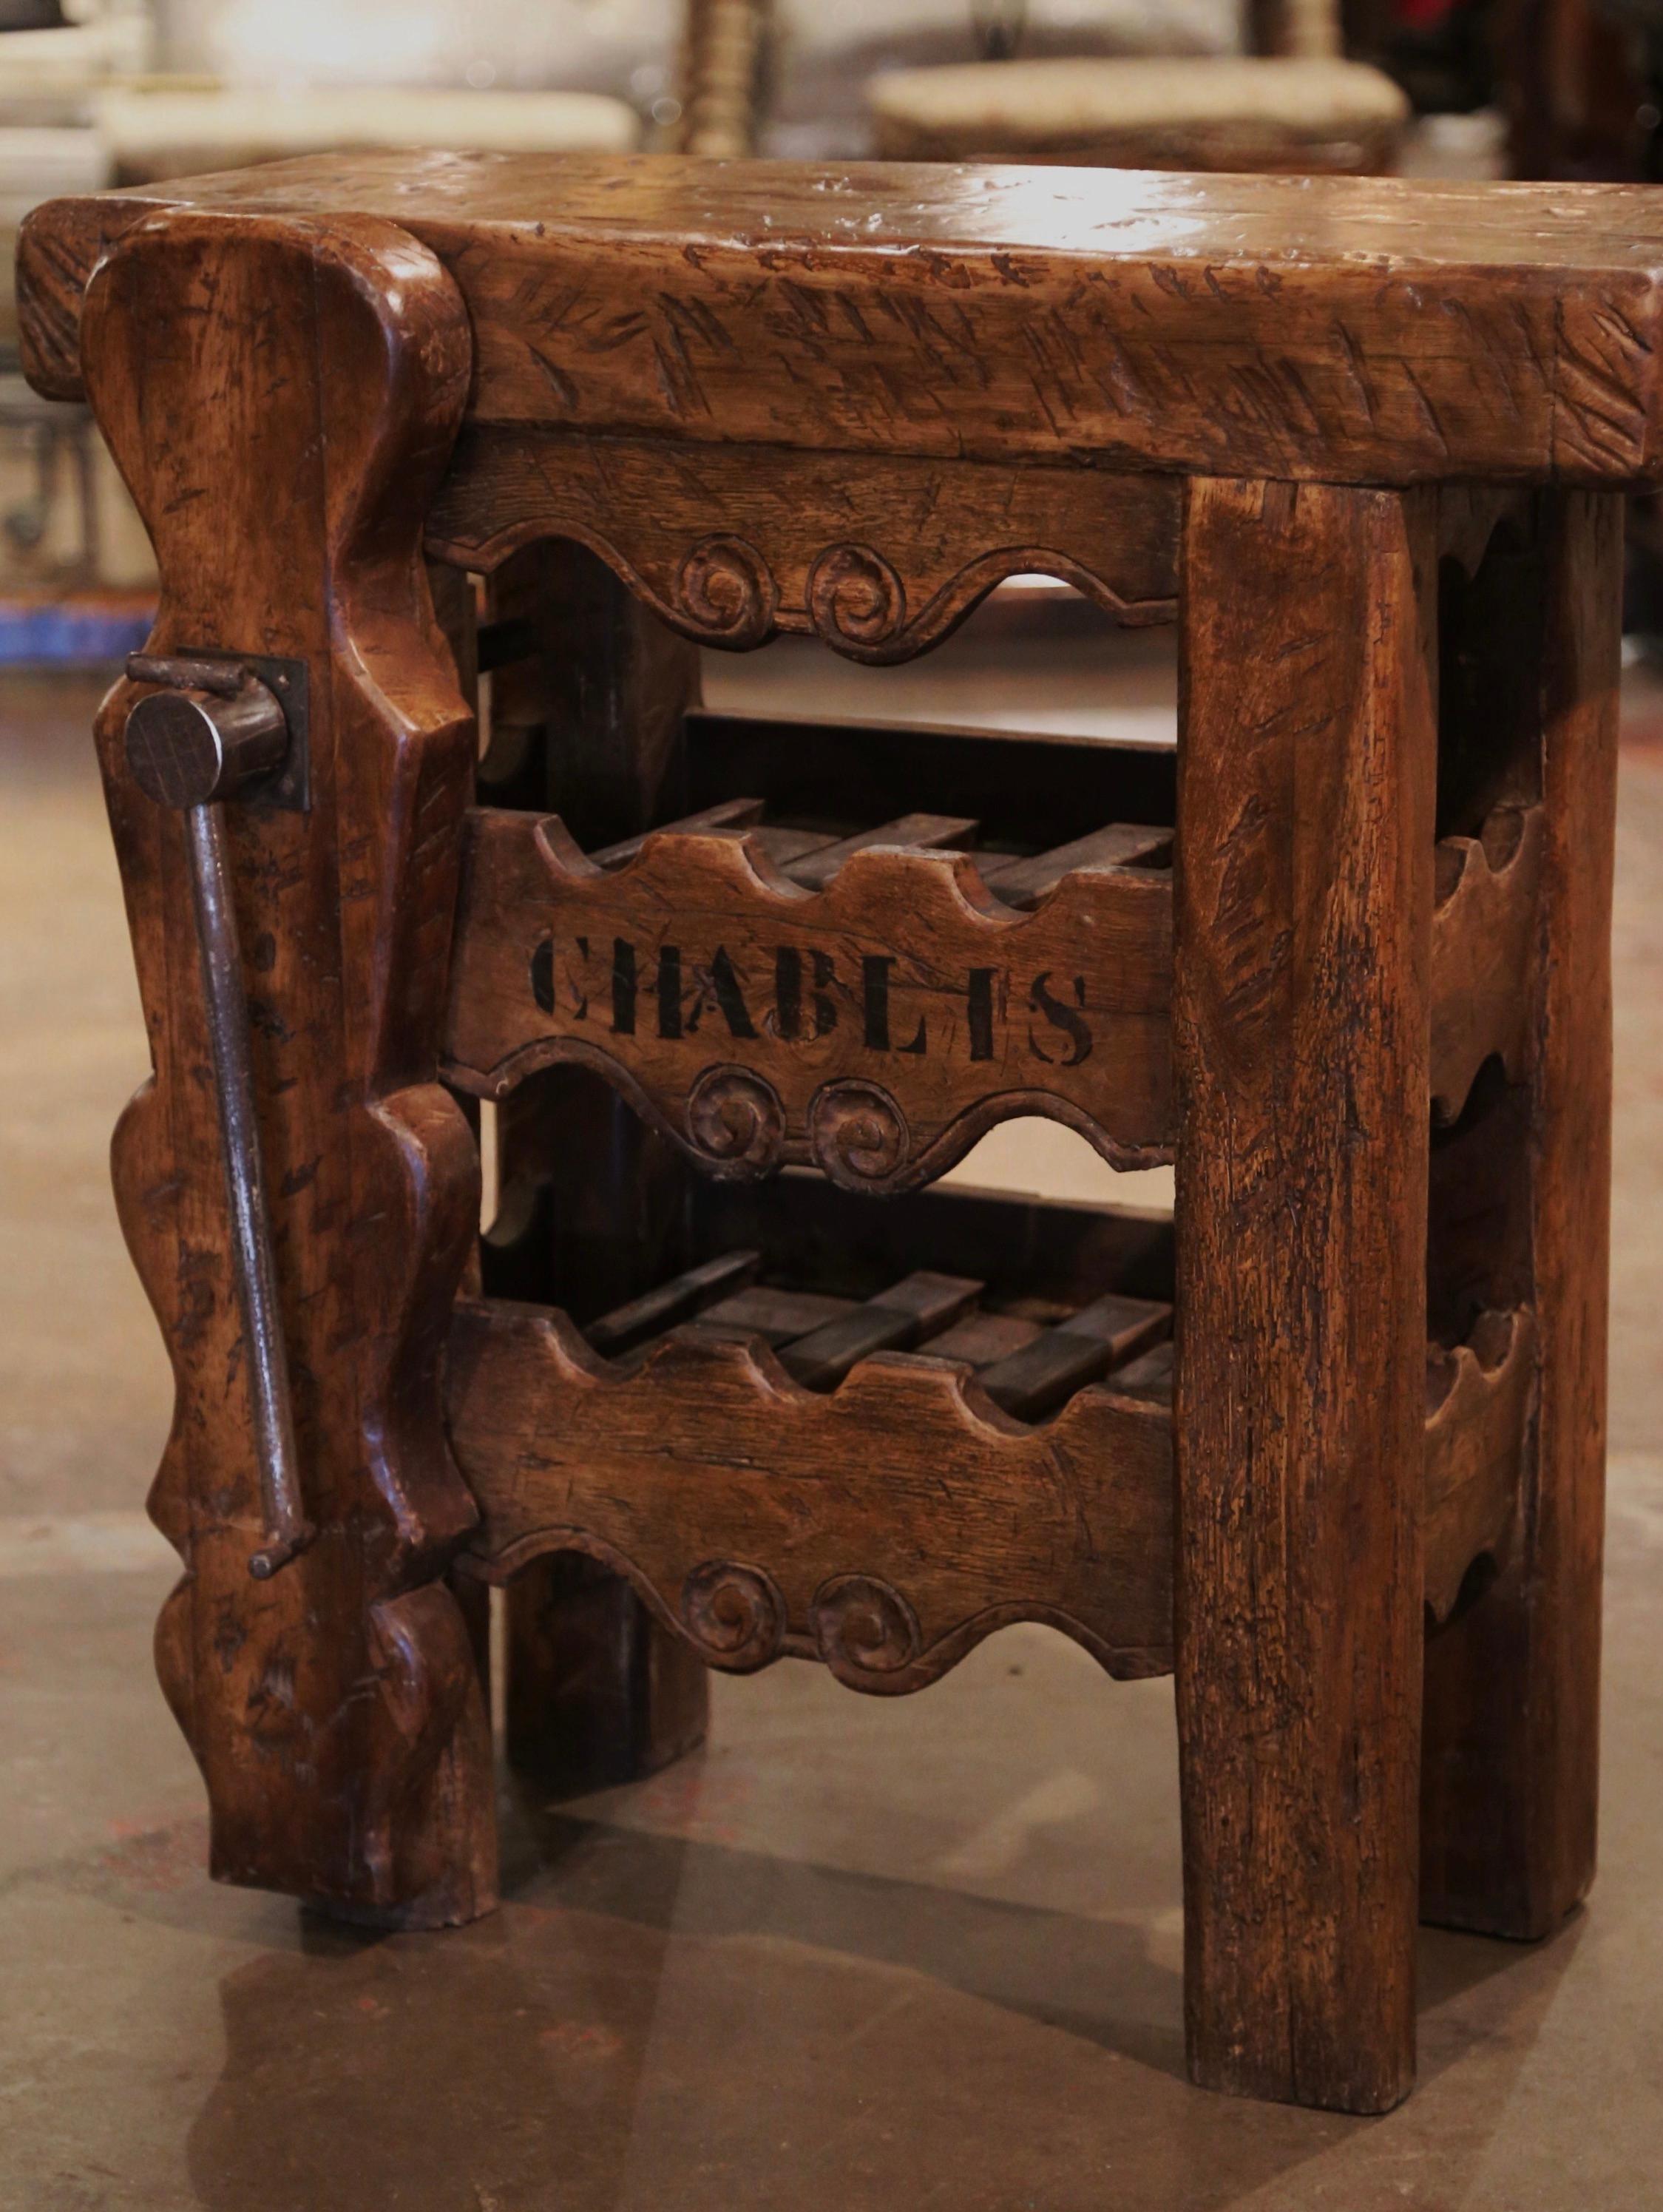 This antique table was crafted in the Poitou region of France, circa 1880. The rustic, oak piece decorated with the word 